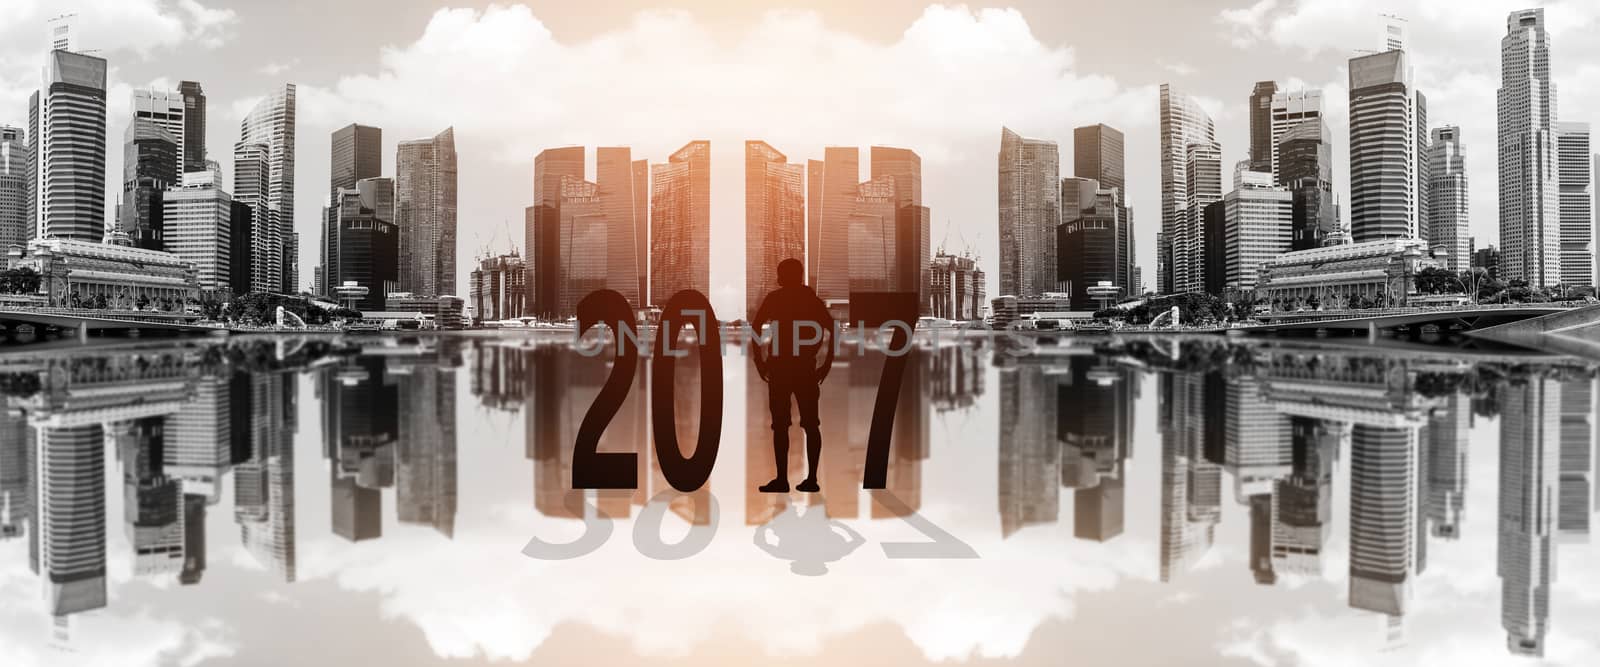 Silhouette of young man standing between 2017 years with beautiful blurred city background.